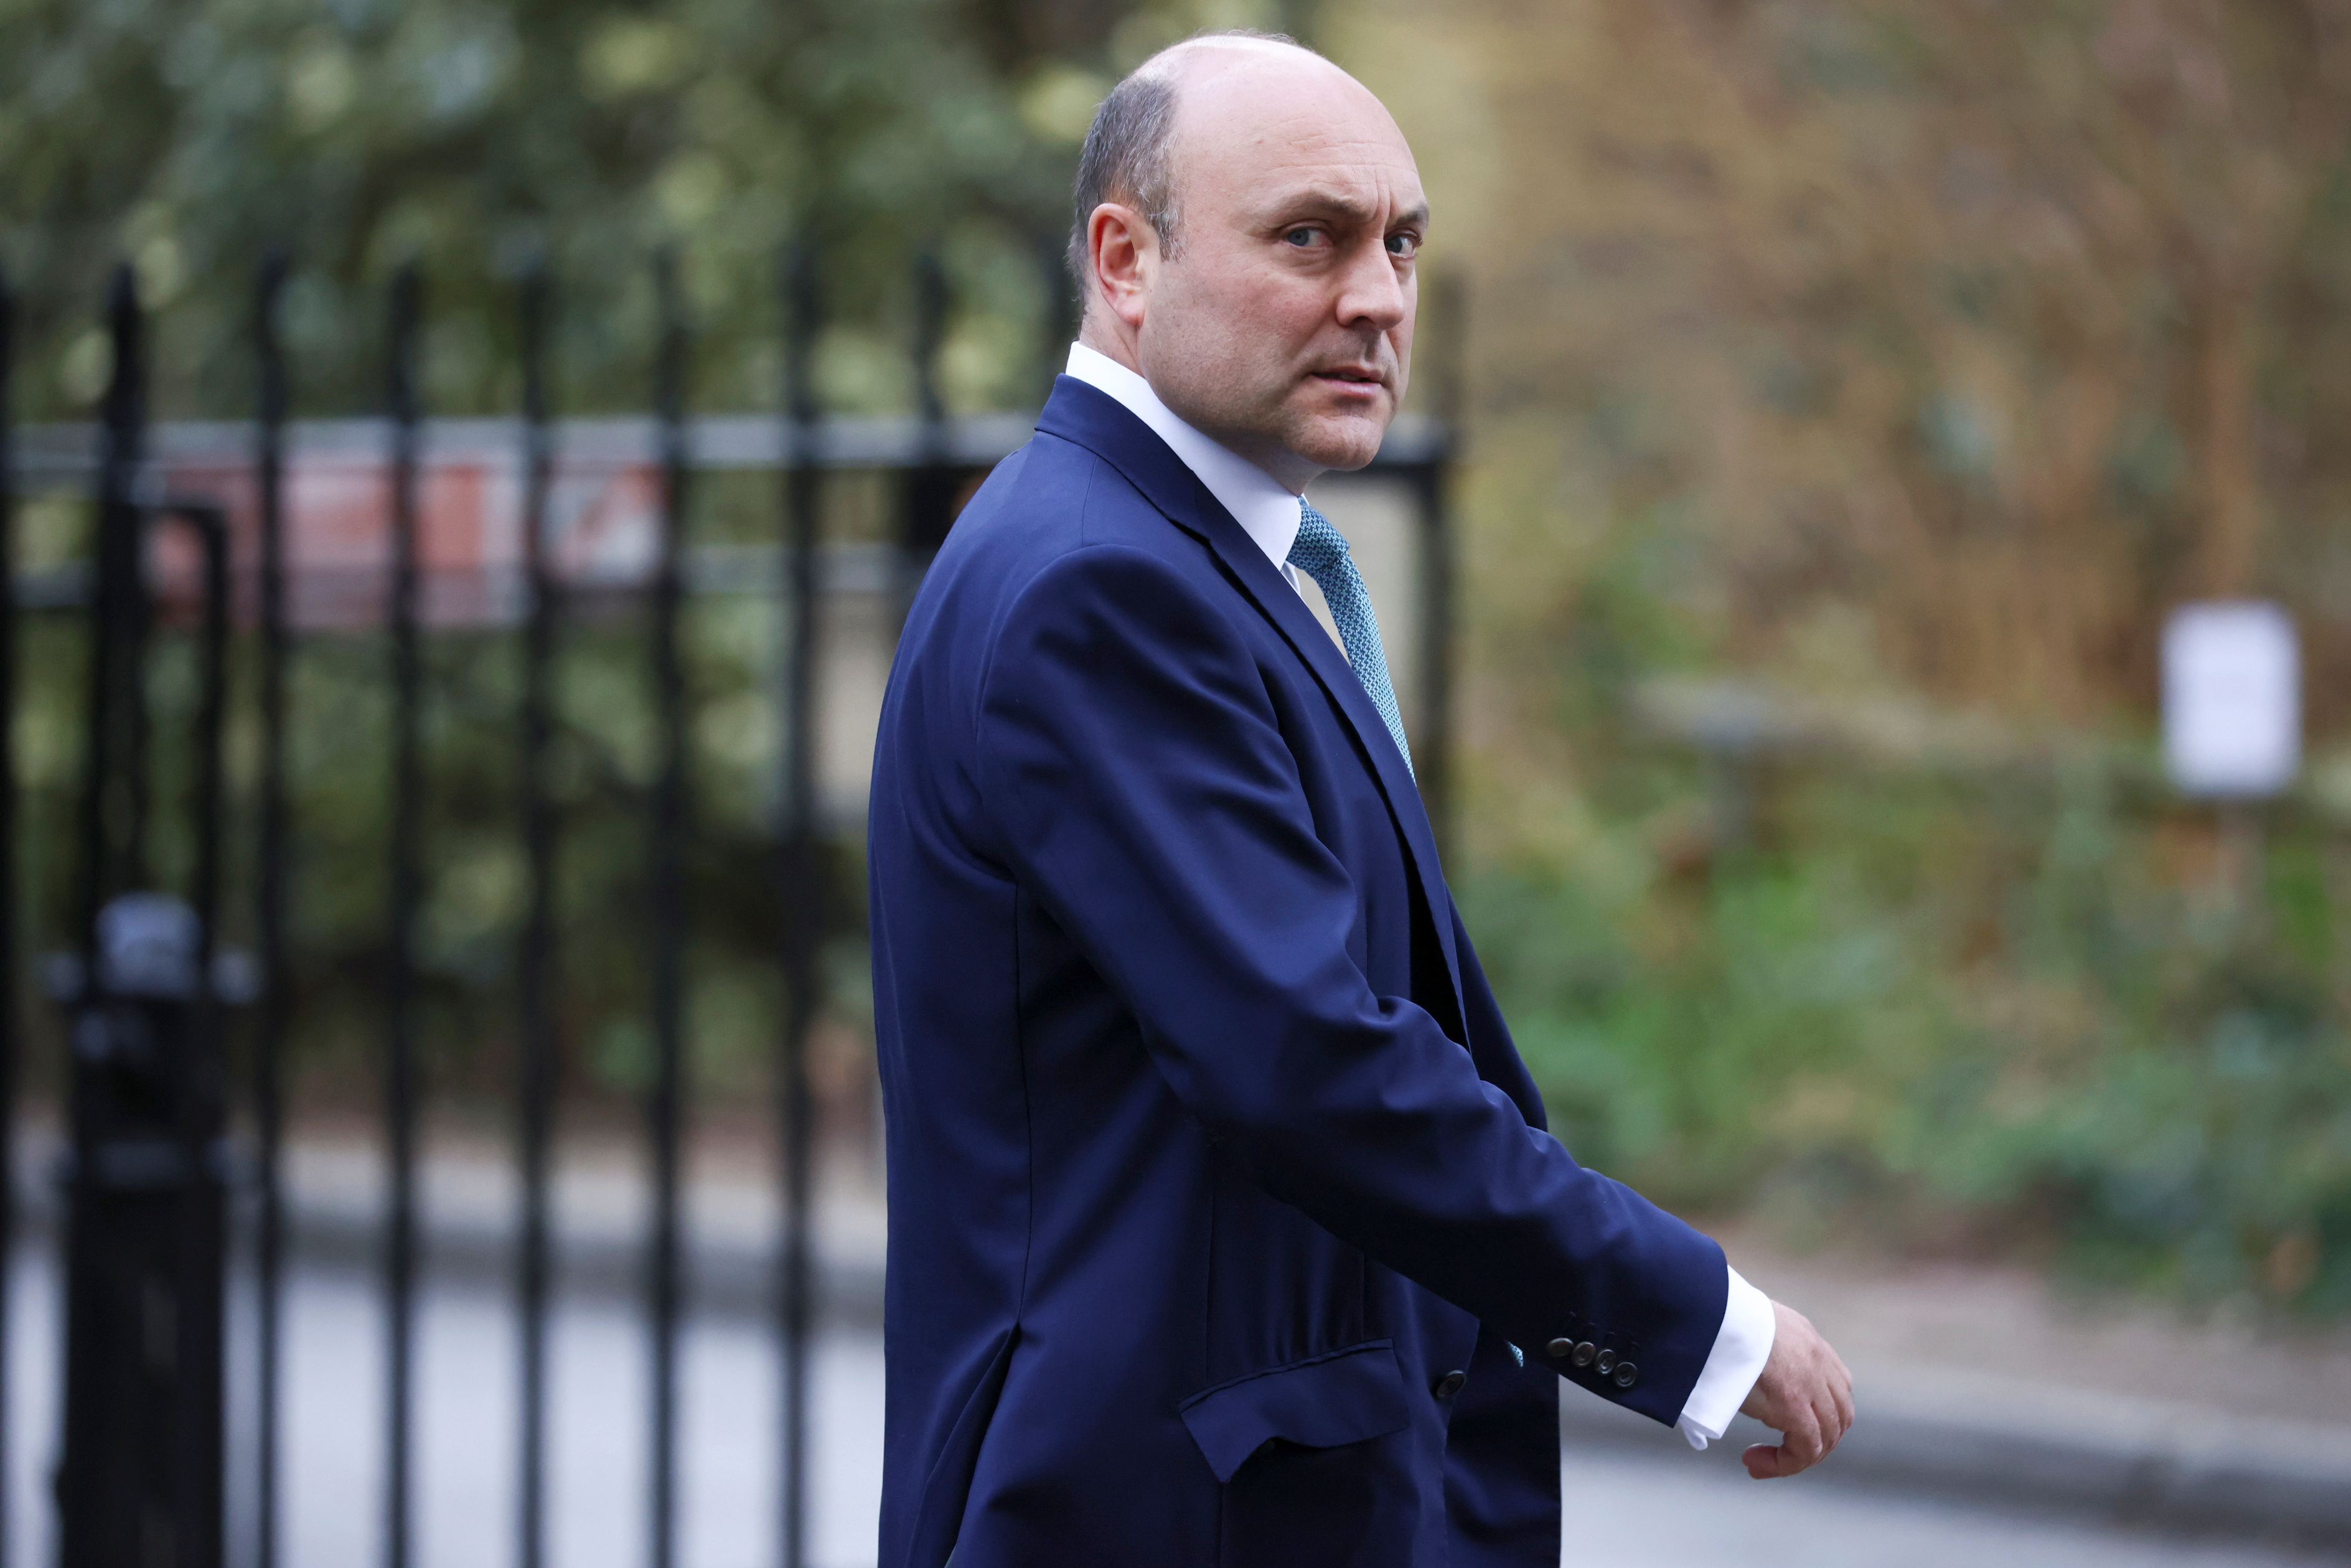 Director of the Number 10 Policy Unit Andrew Griffith is seen walking in Downing Street in London